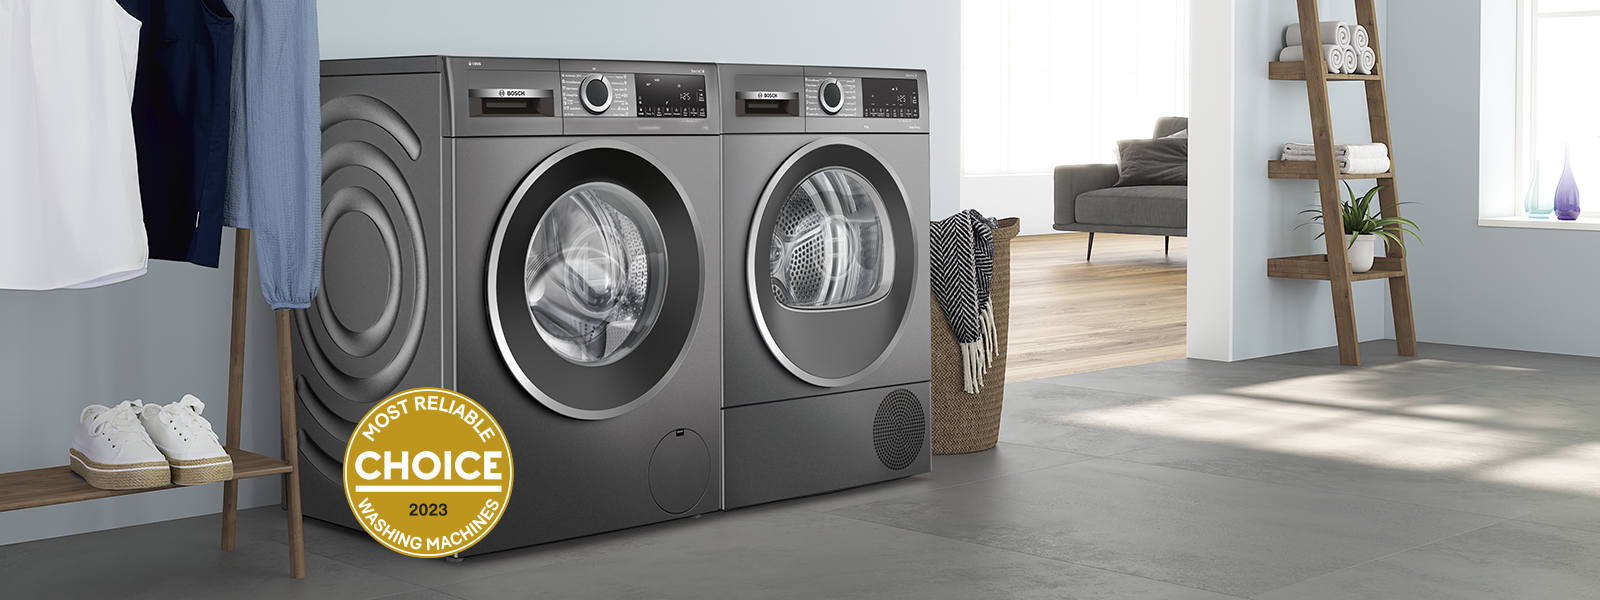 Get A Visa E-Gift Card Valued Up To $400* On Selected Bosch Laundry Appliances at Hart & Co